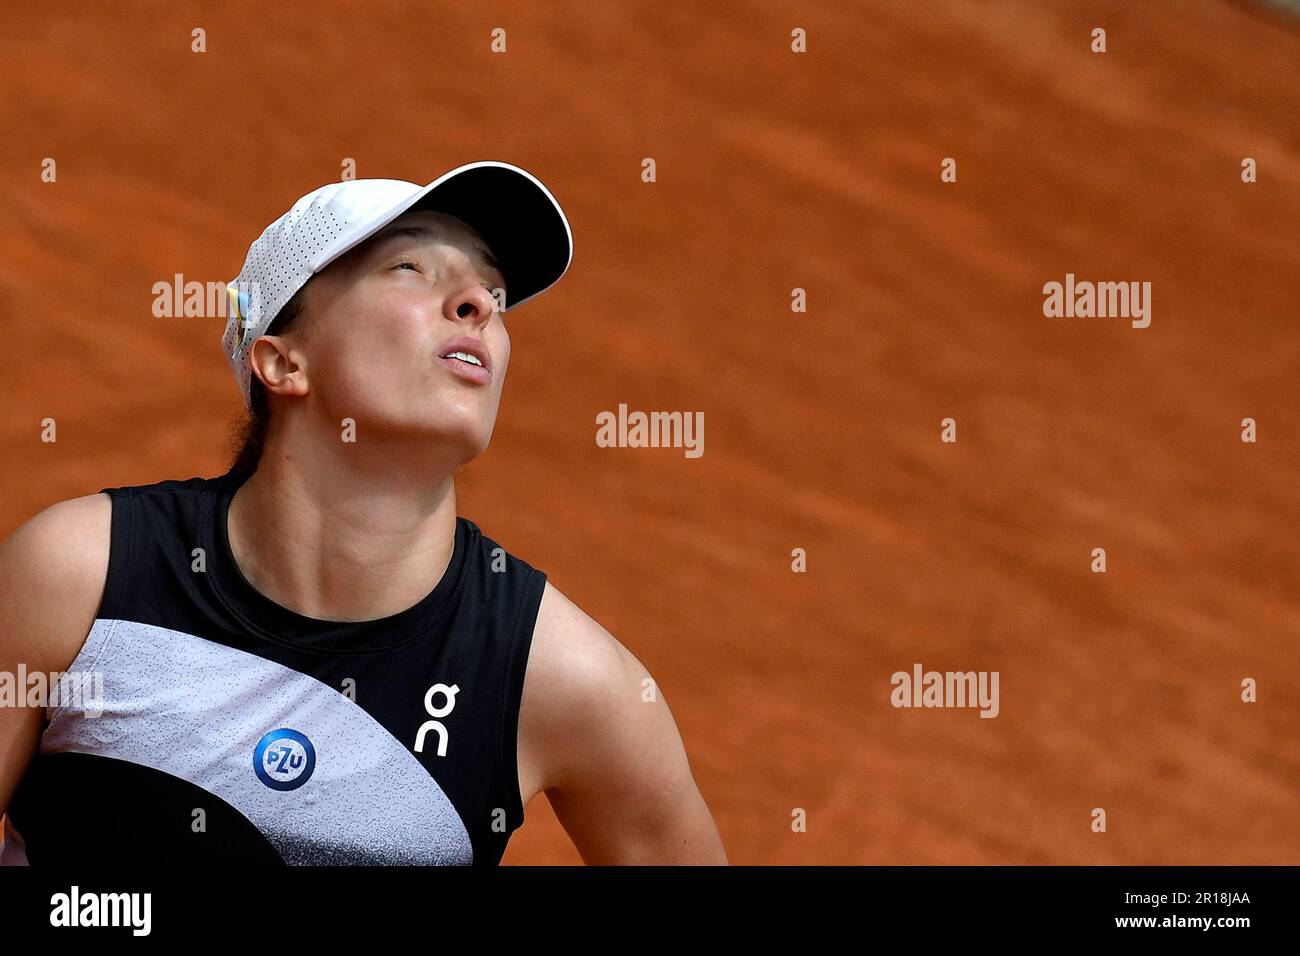 Rome, Italy. 12th May, 2023. Iga Swiatek of Poland during her match against Anastasia Pavlyuchenkova of Russia at the Internazionali BNL d'Italia tennis tournament at Foro Italico in Rome, Italy on May 11th, 2023. Credit: Insidefoto di andrea staccioli/Alamy Live News Stock Photo